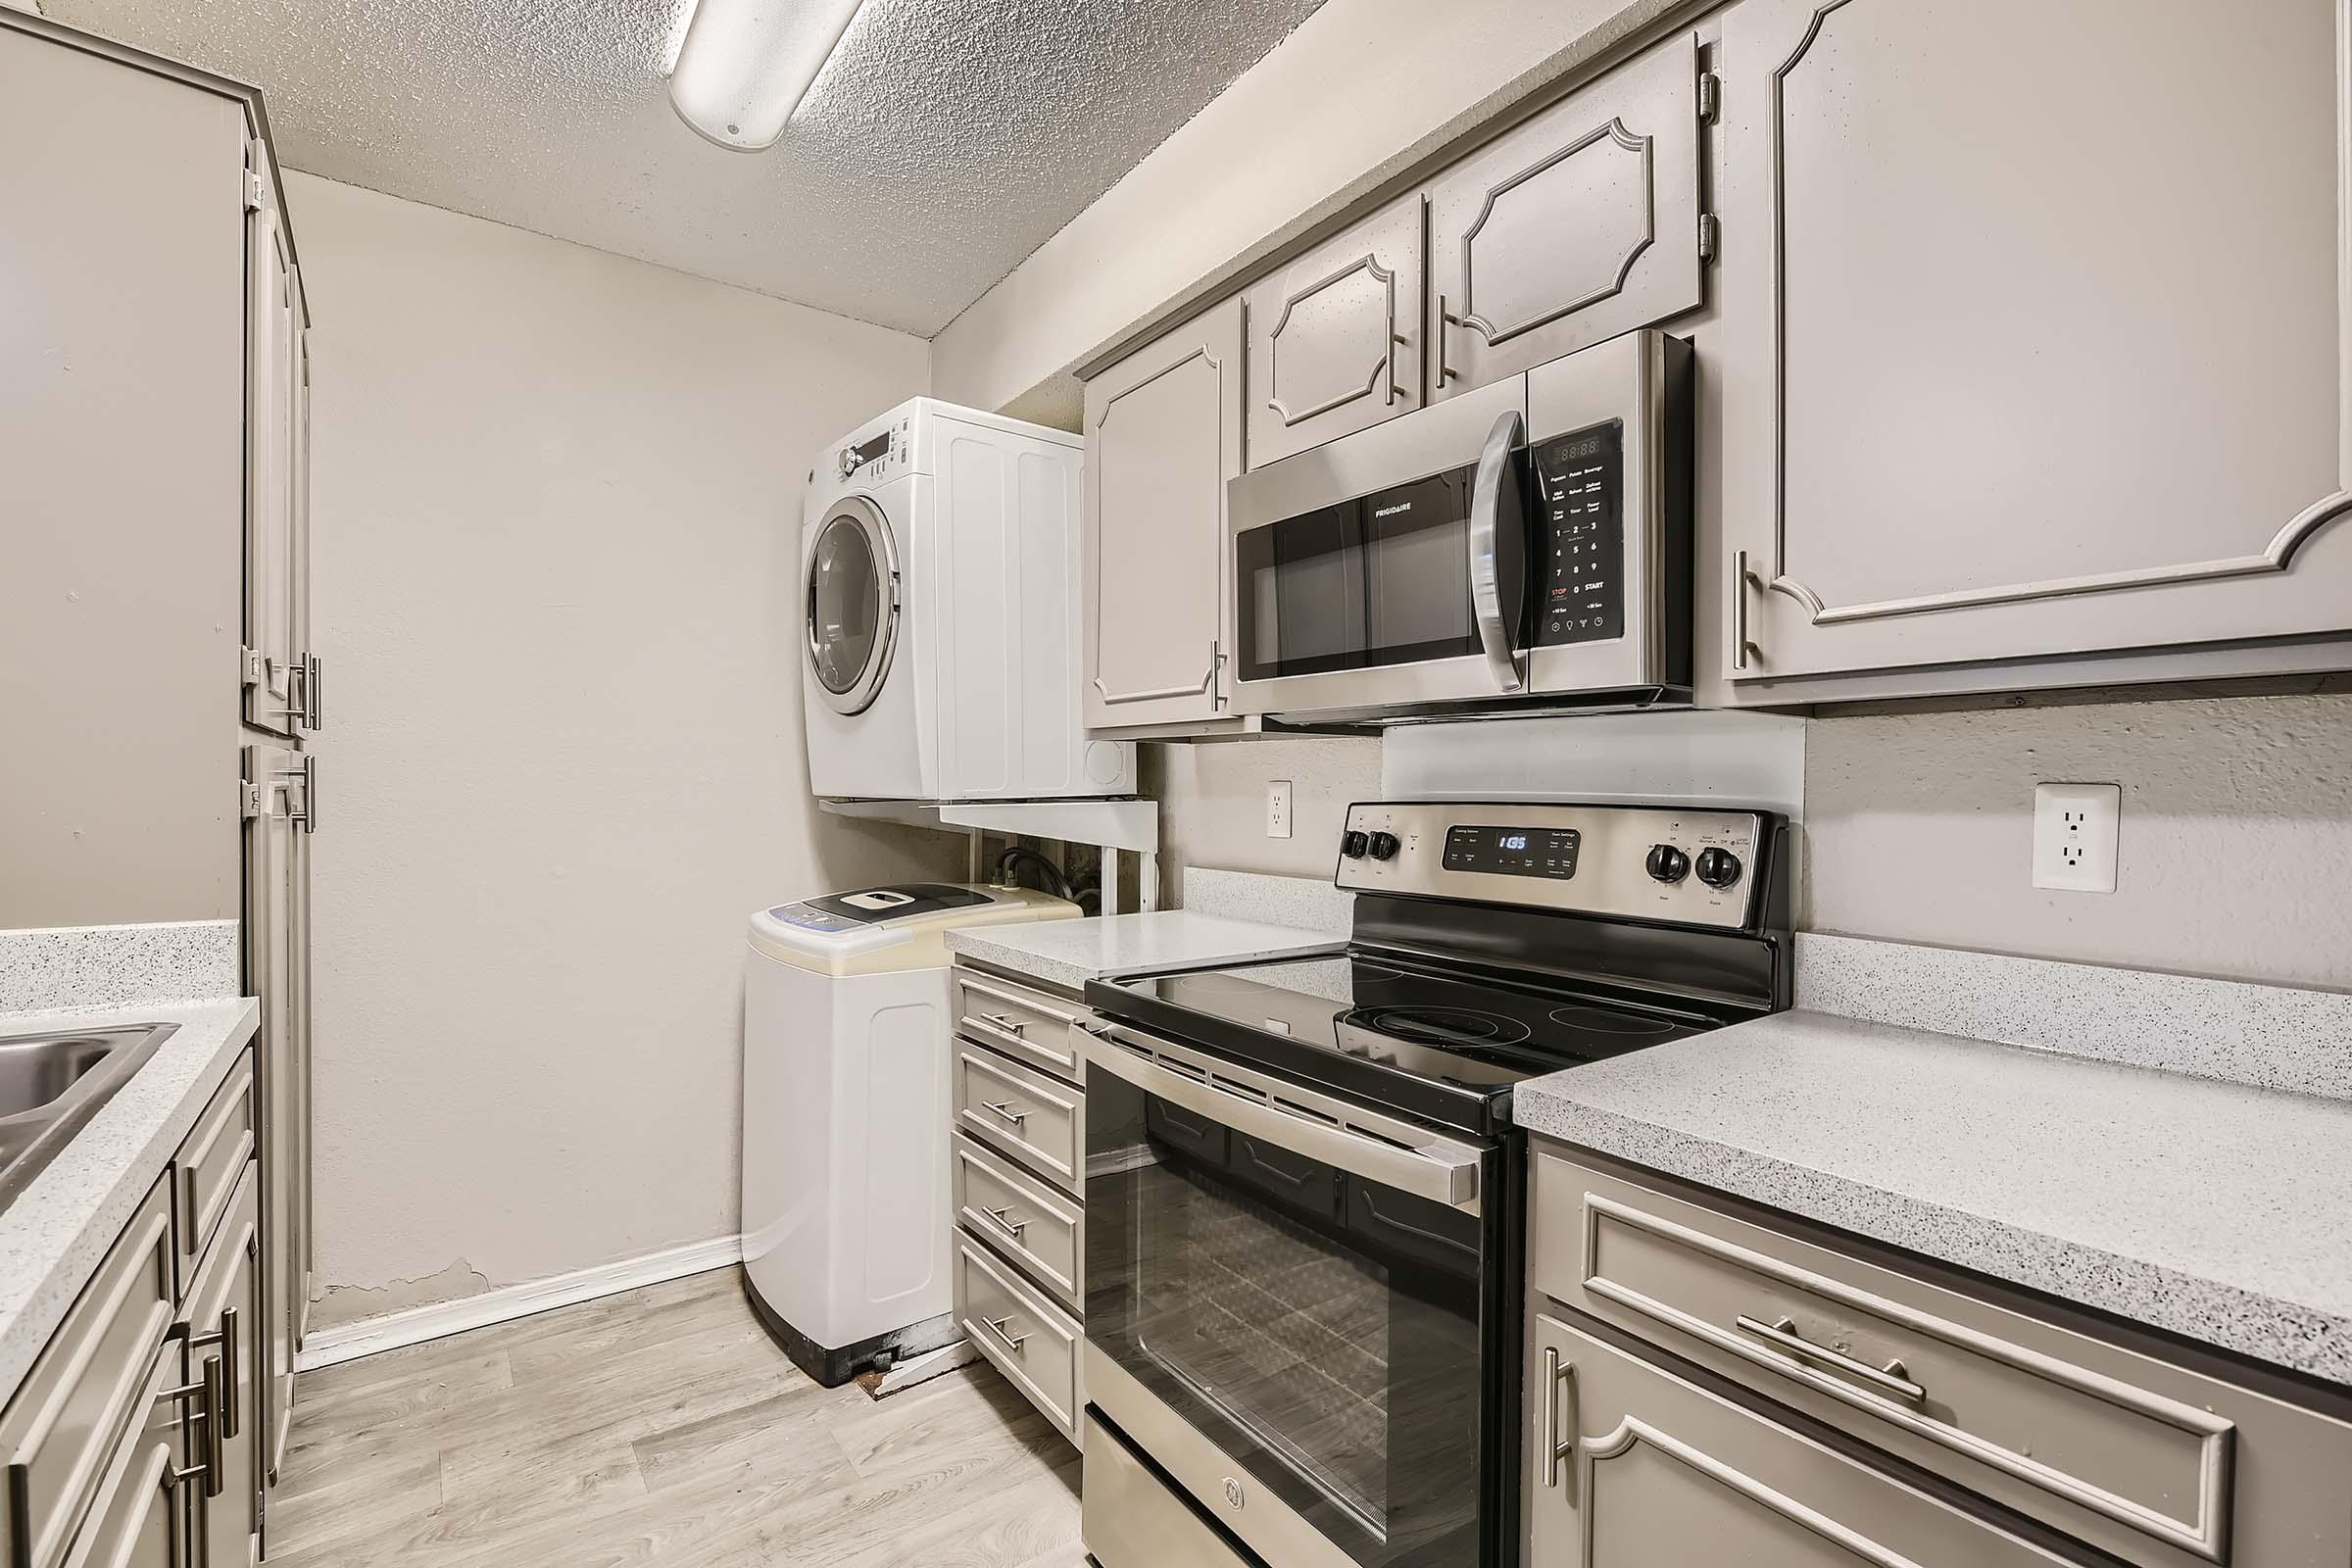 Bedfored, TX apartment kitchen with stove, microwave, and washer/dryer